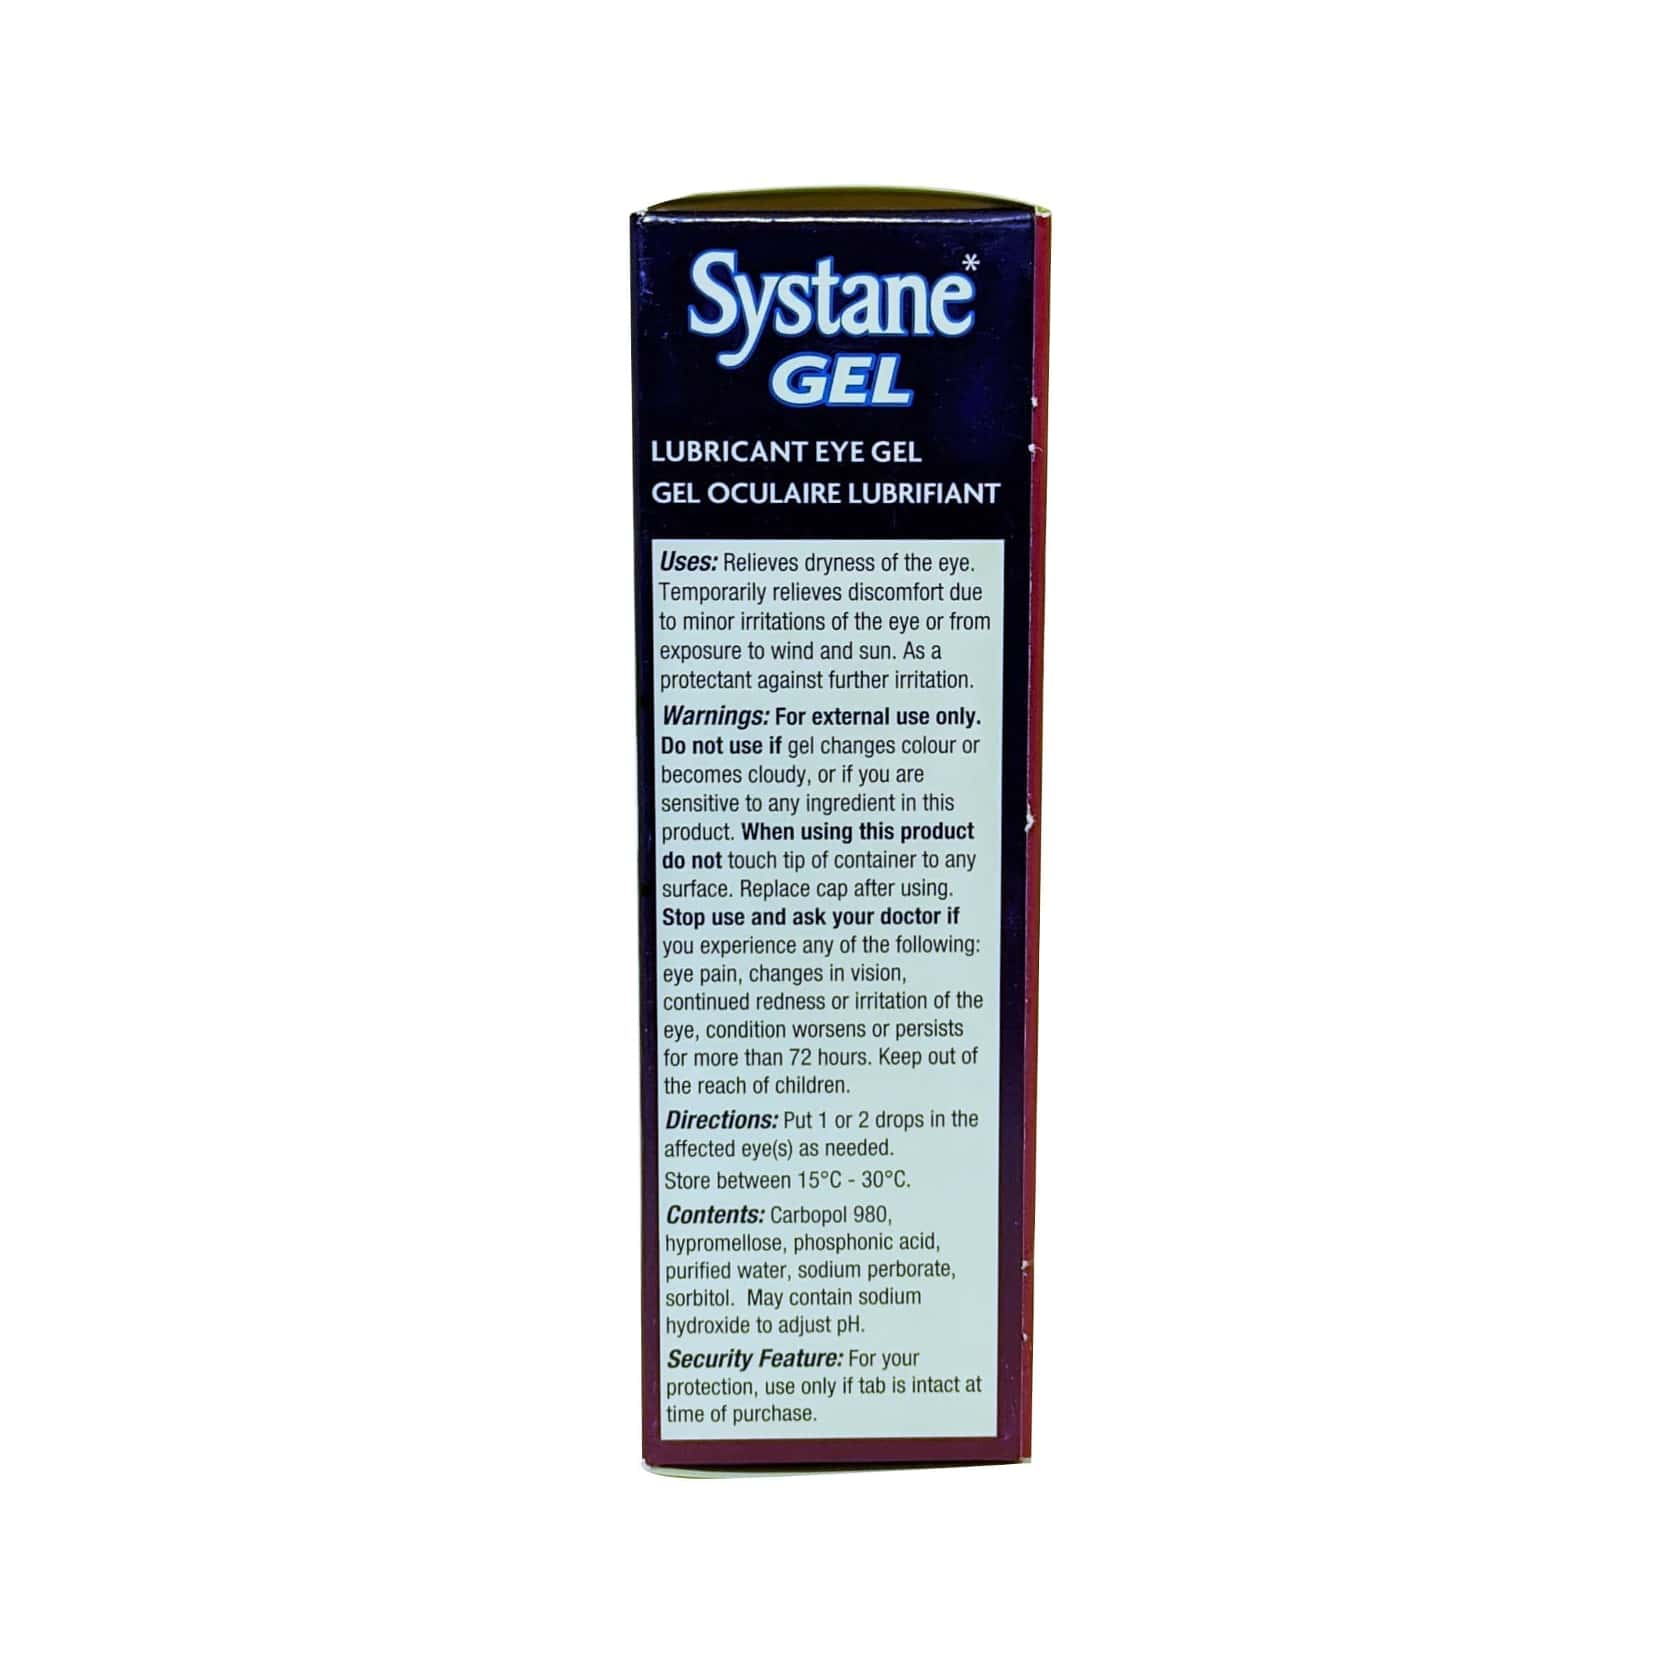 Product details, ingredients, directions, and warnings for Alcon Systane Gel Anytime Protection Lubricant Eye Gel in English